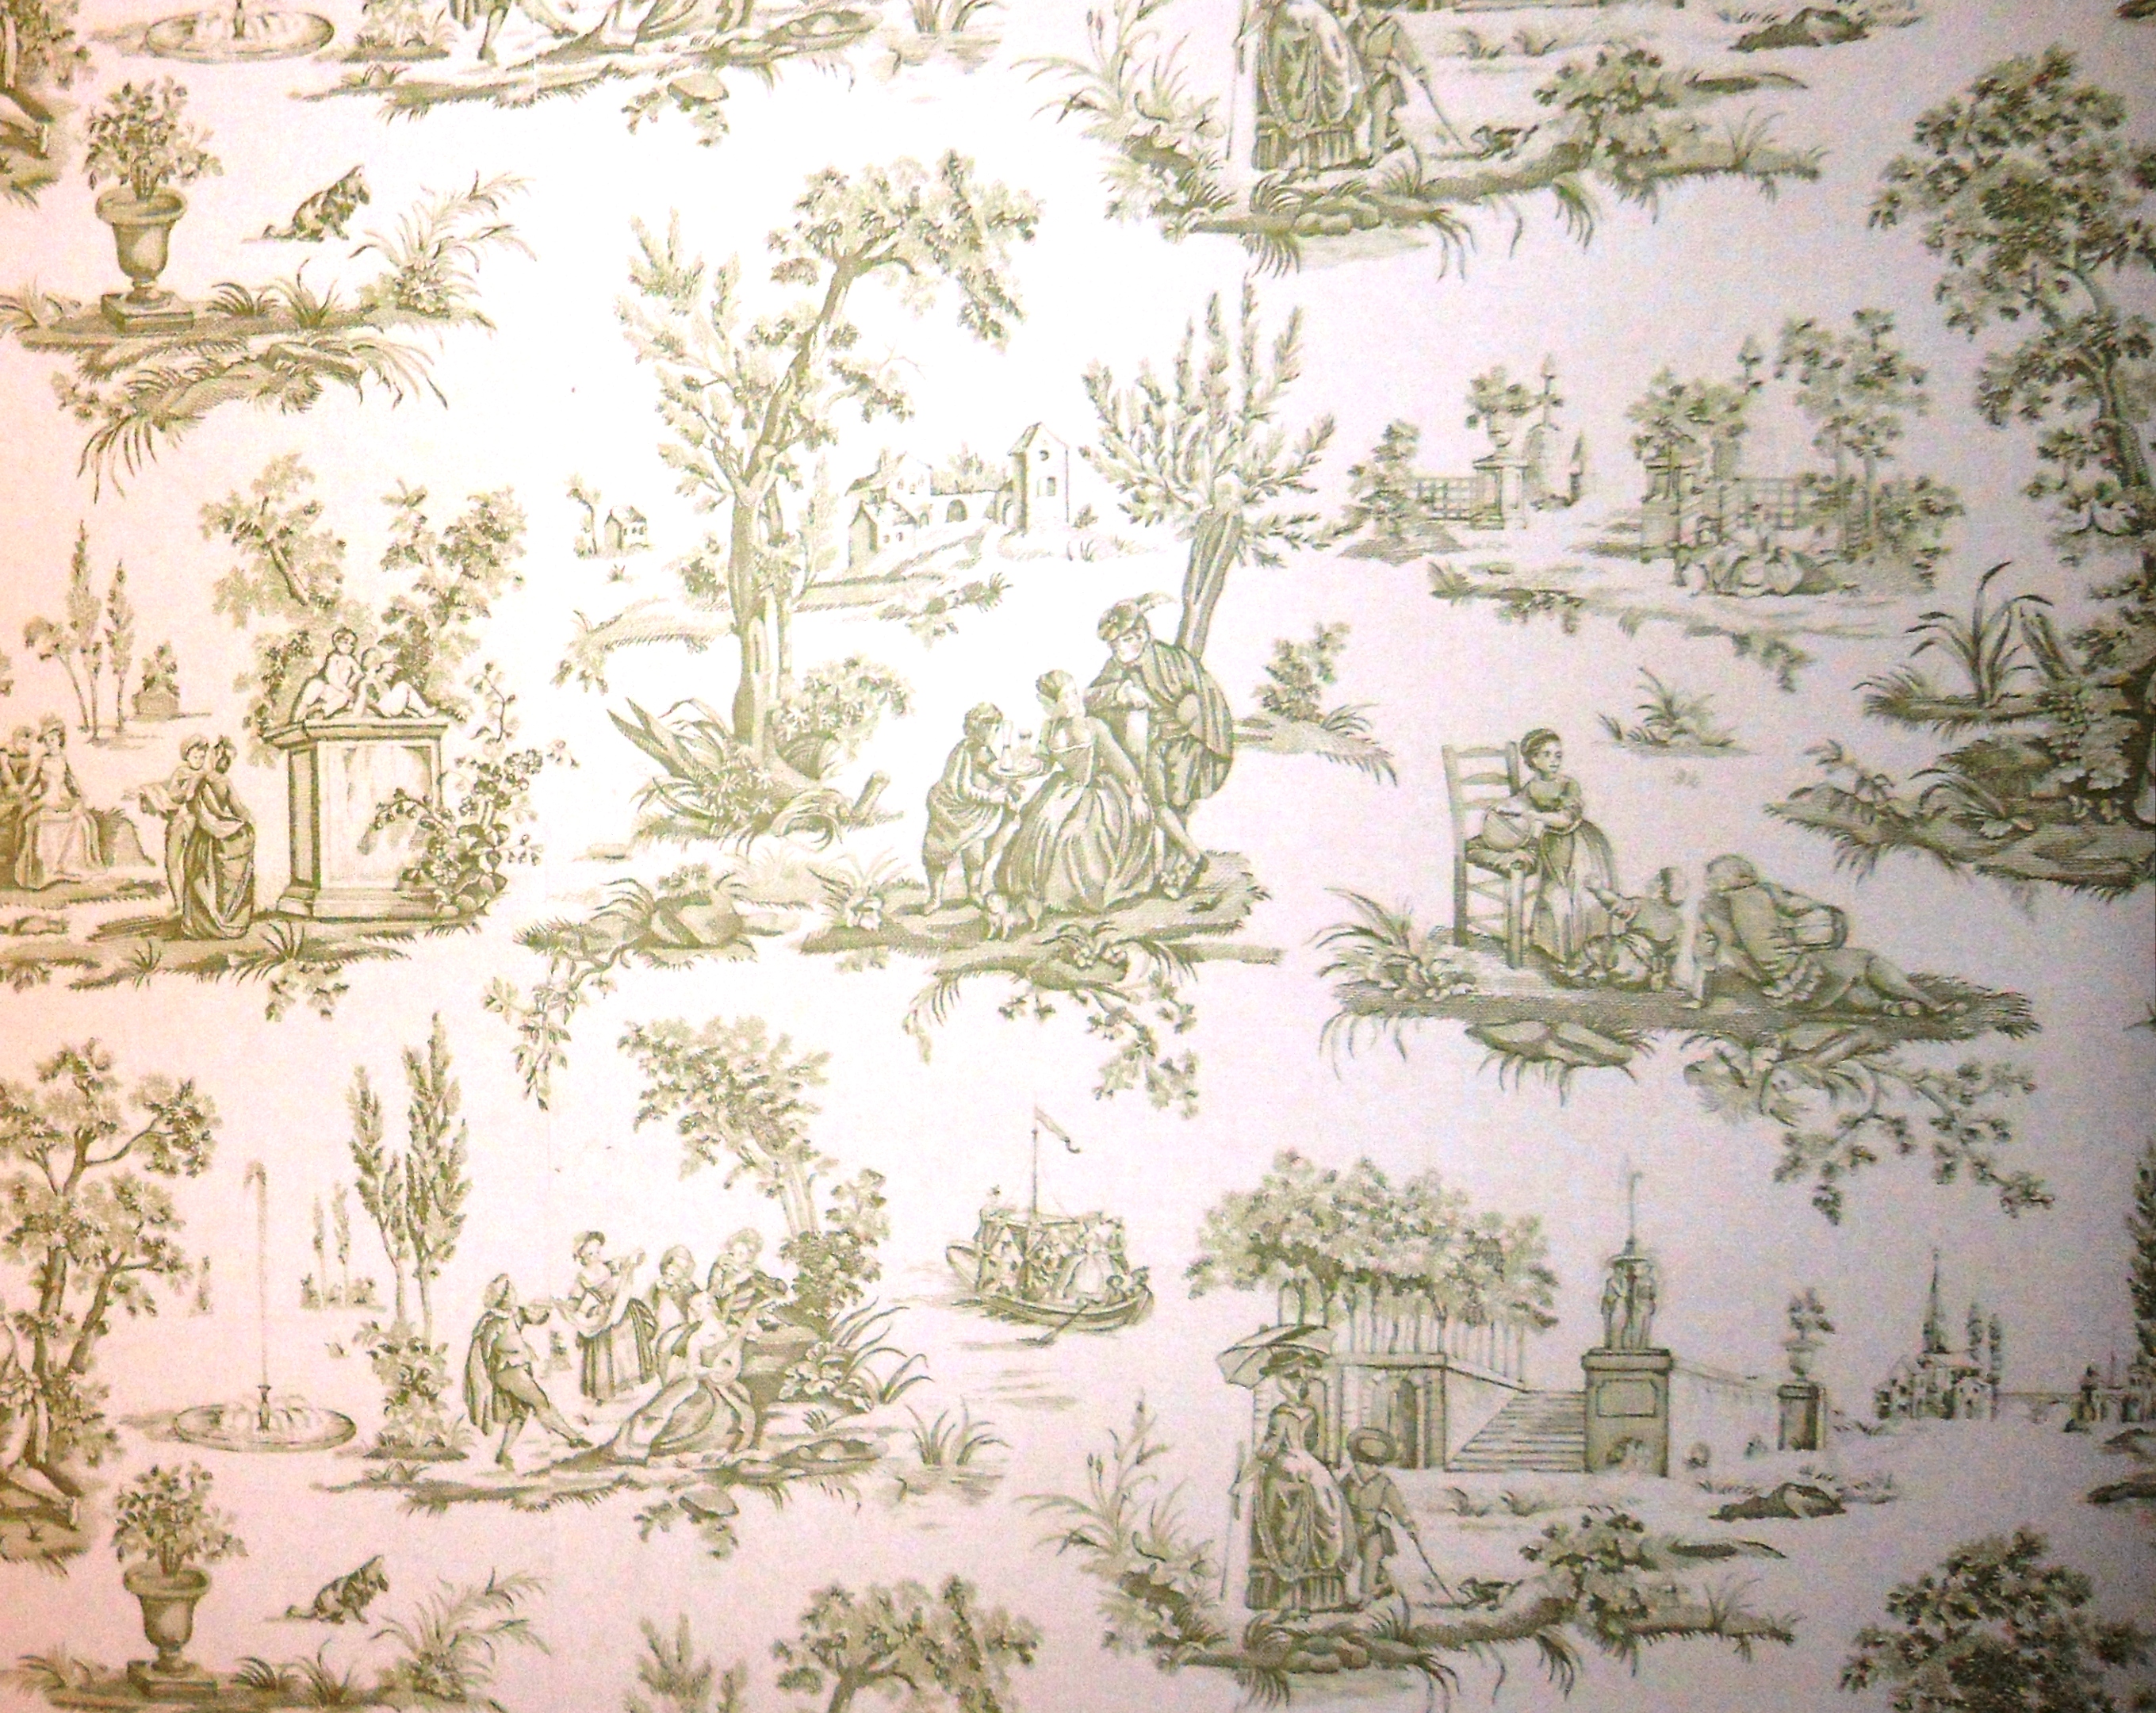 Toile is a french word that can be referred to as either fabric